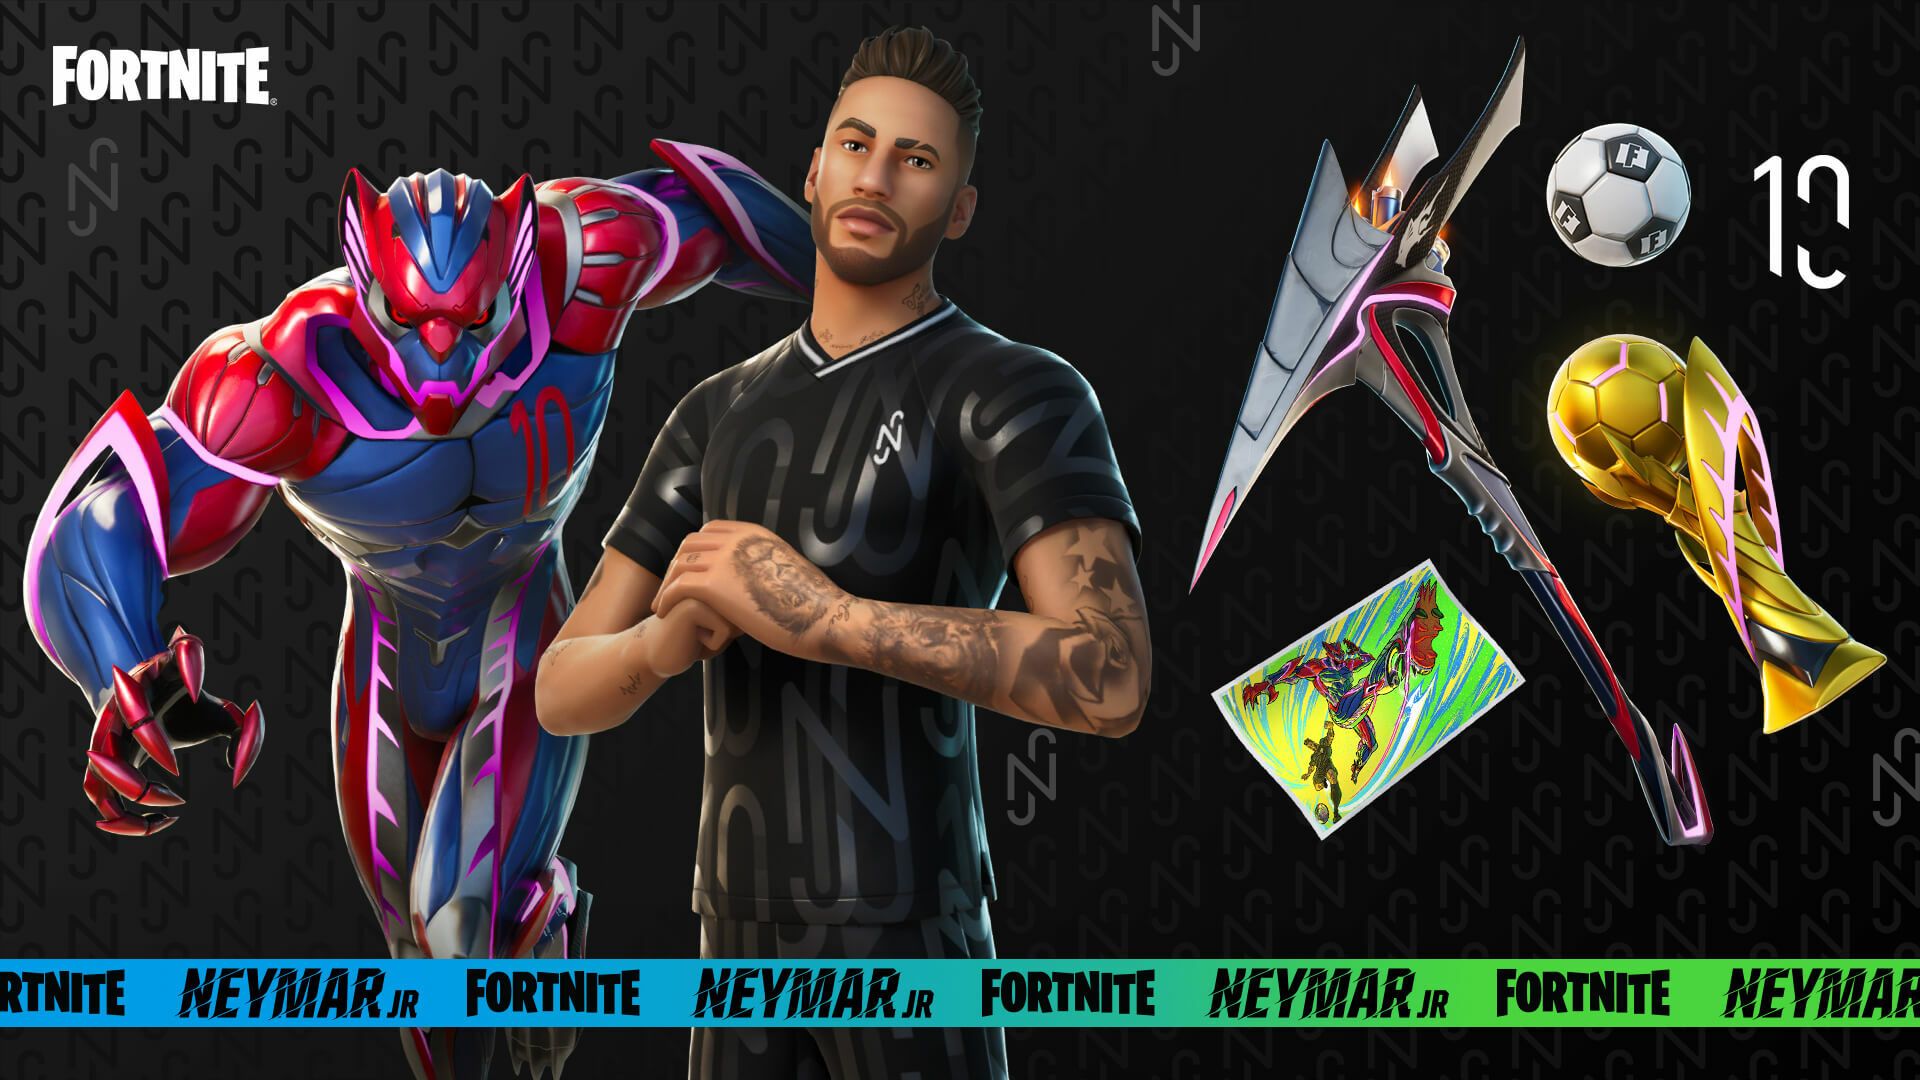 How To Get Neymar Jr. Skin In Fortnite: All Challenges Explained